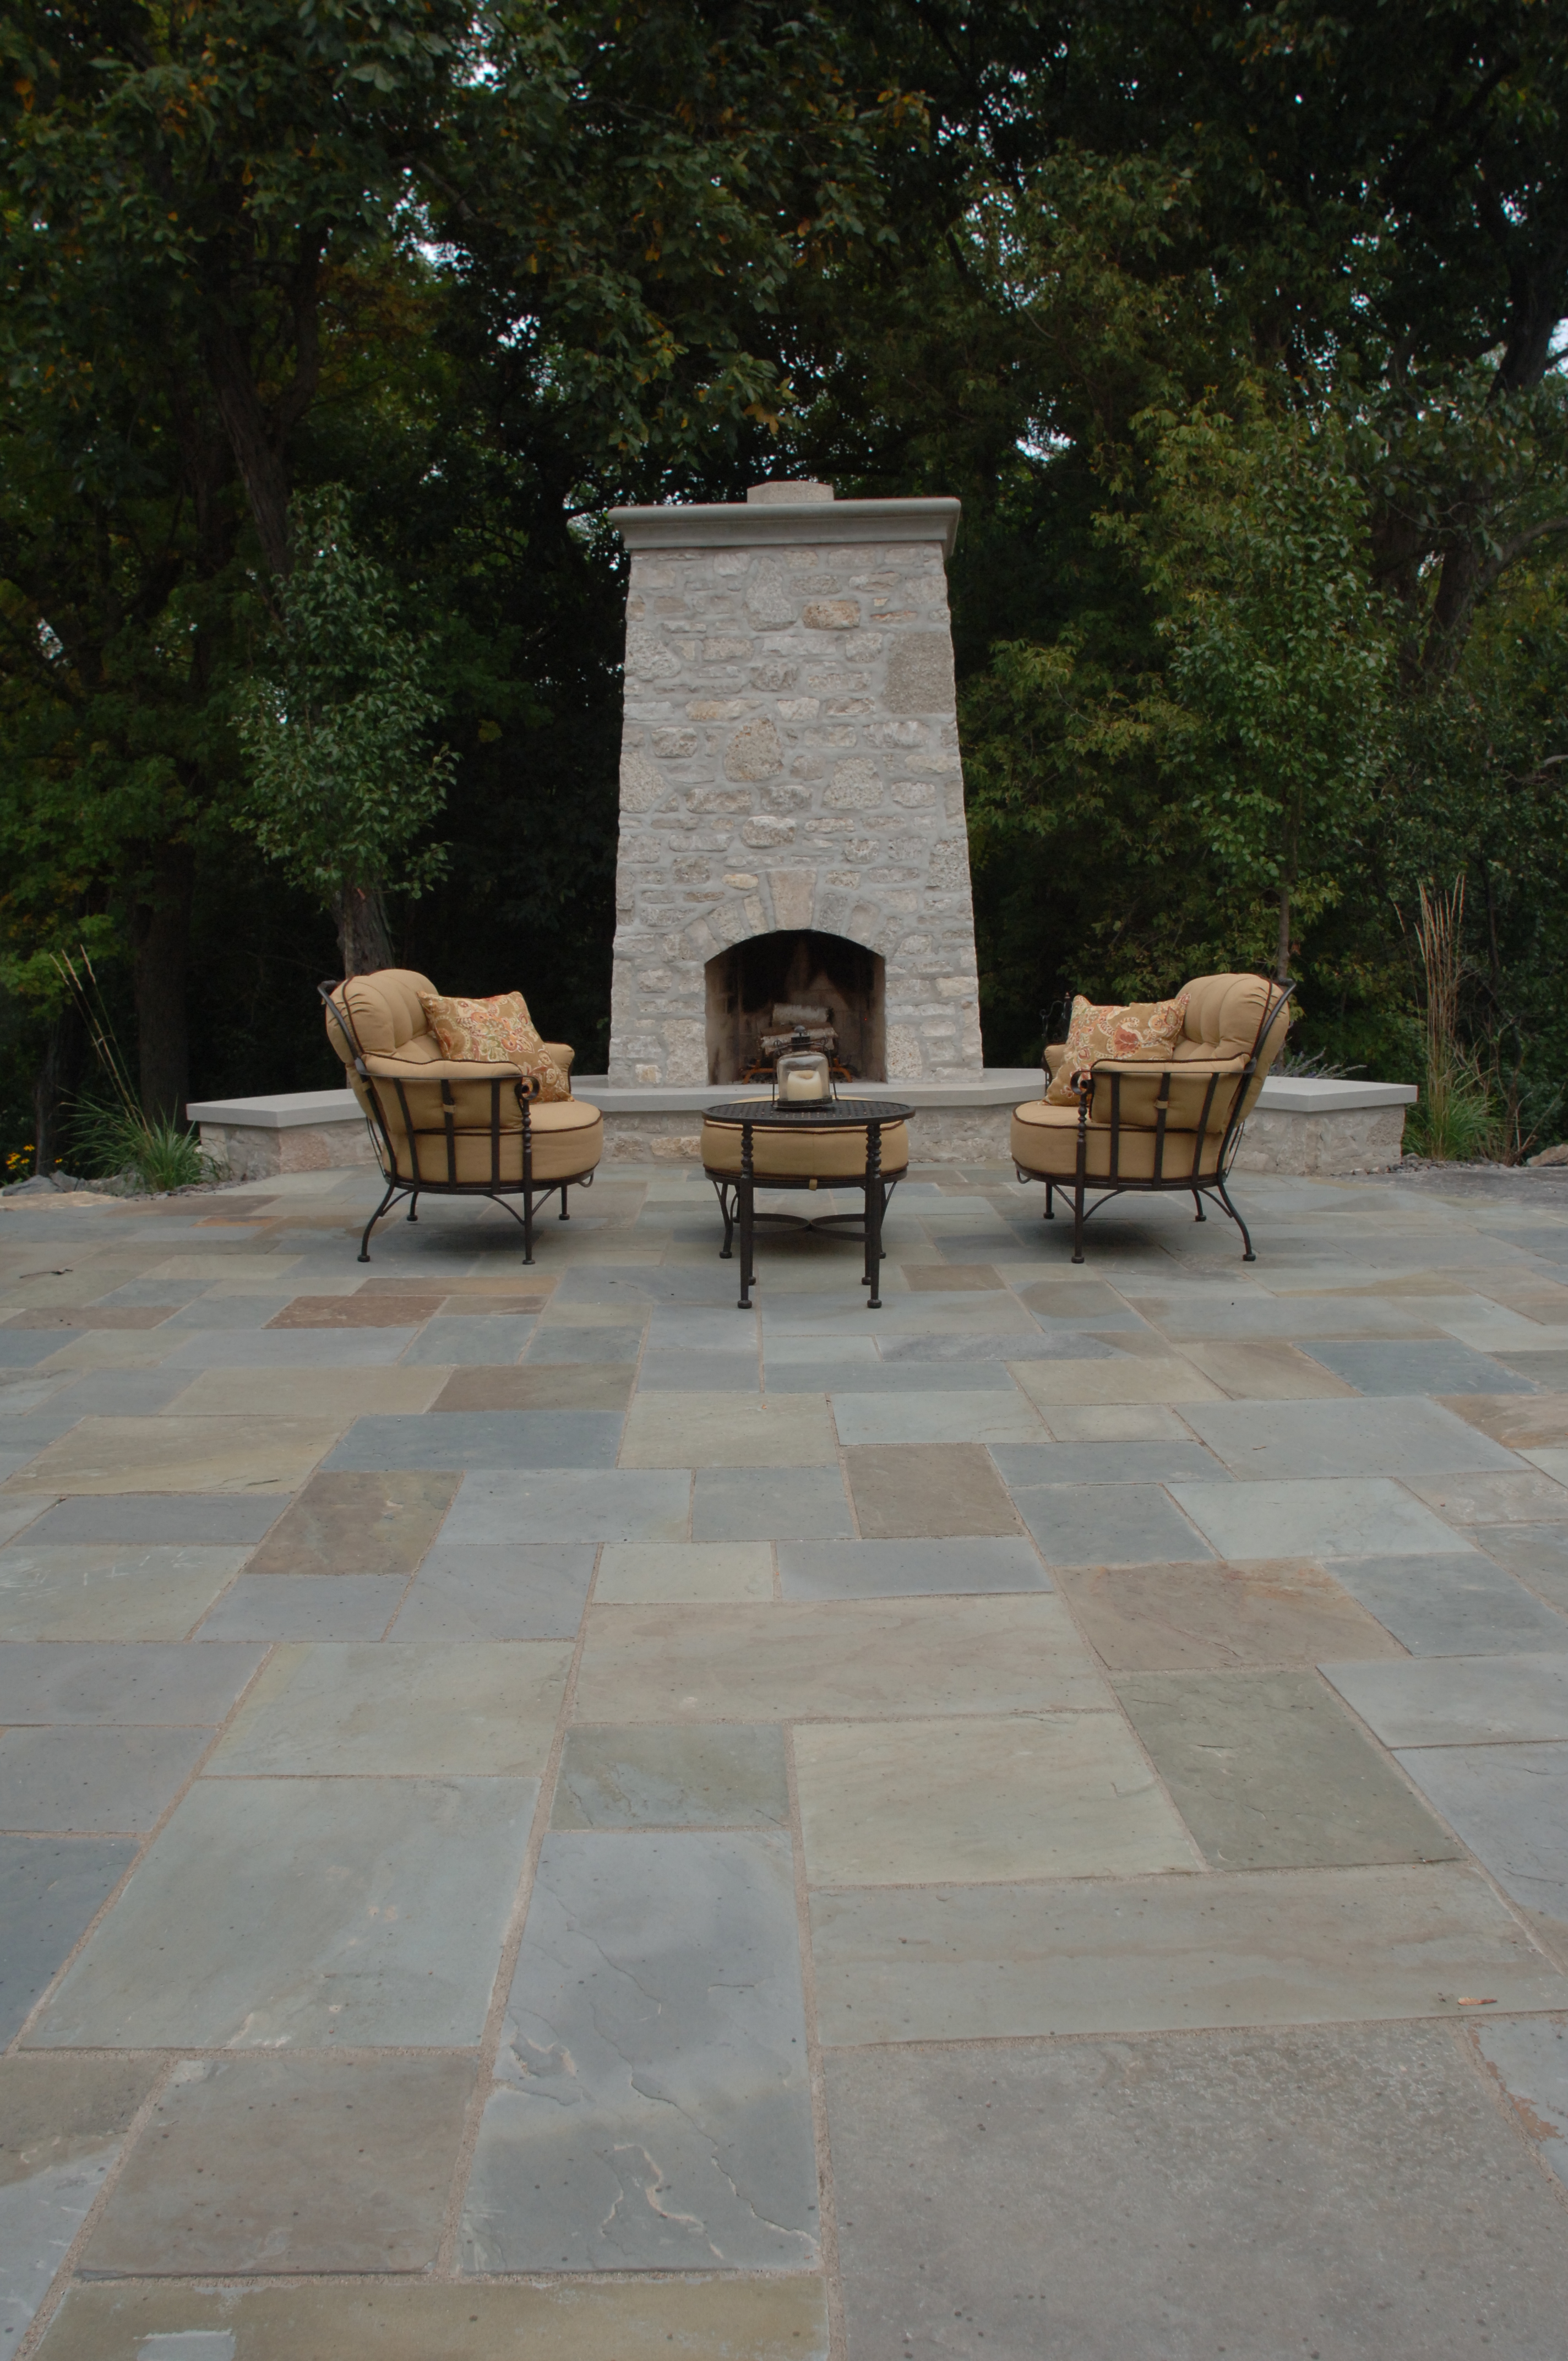 bluestone pavers have a smooth, natural cleft finish that is rich with NBIIASN